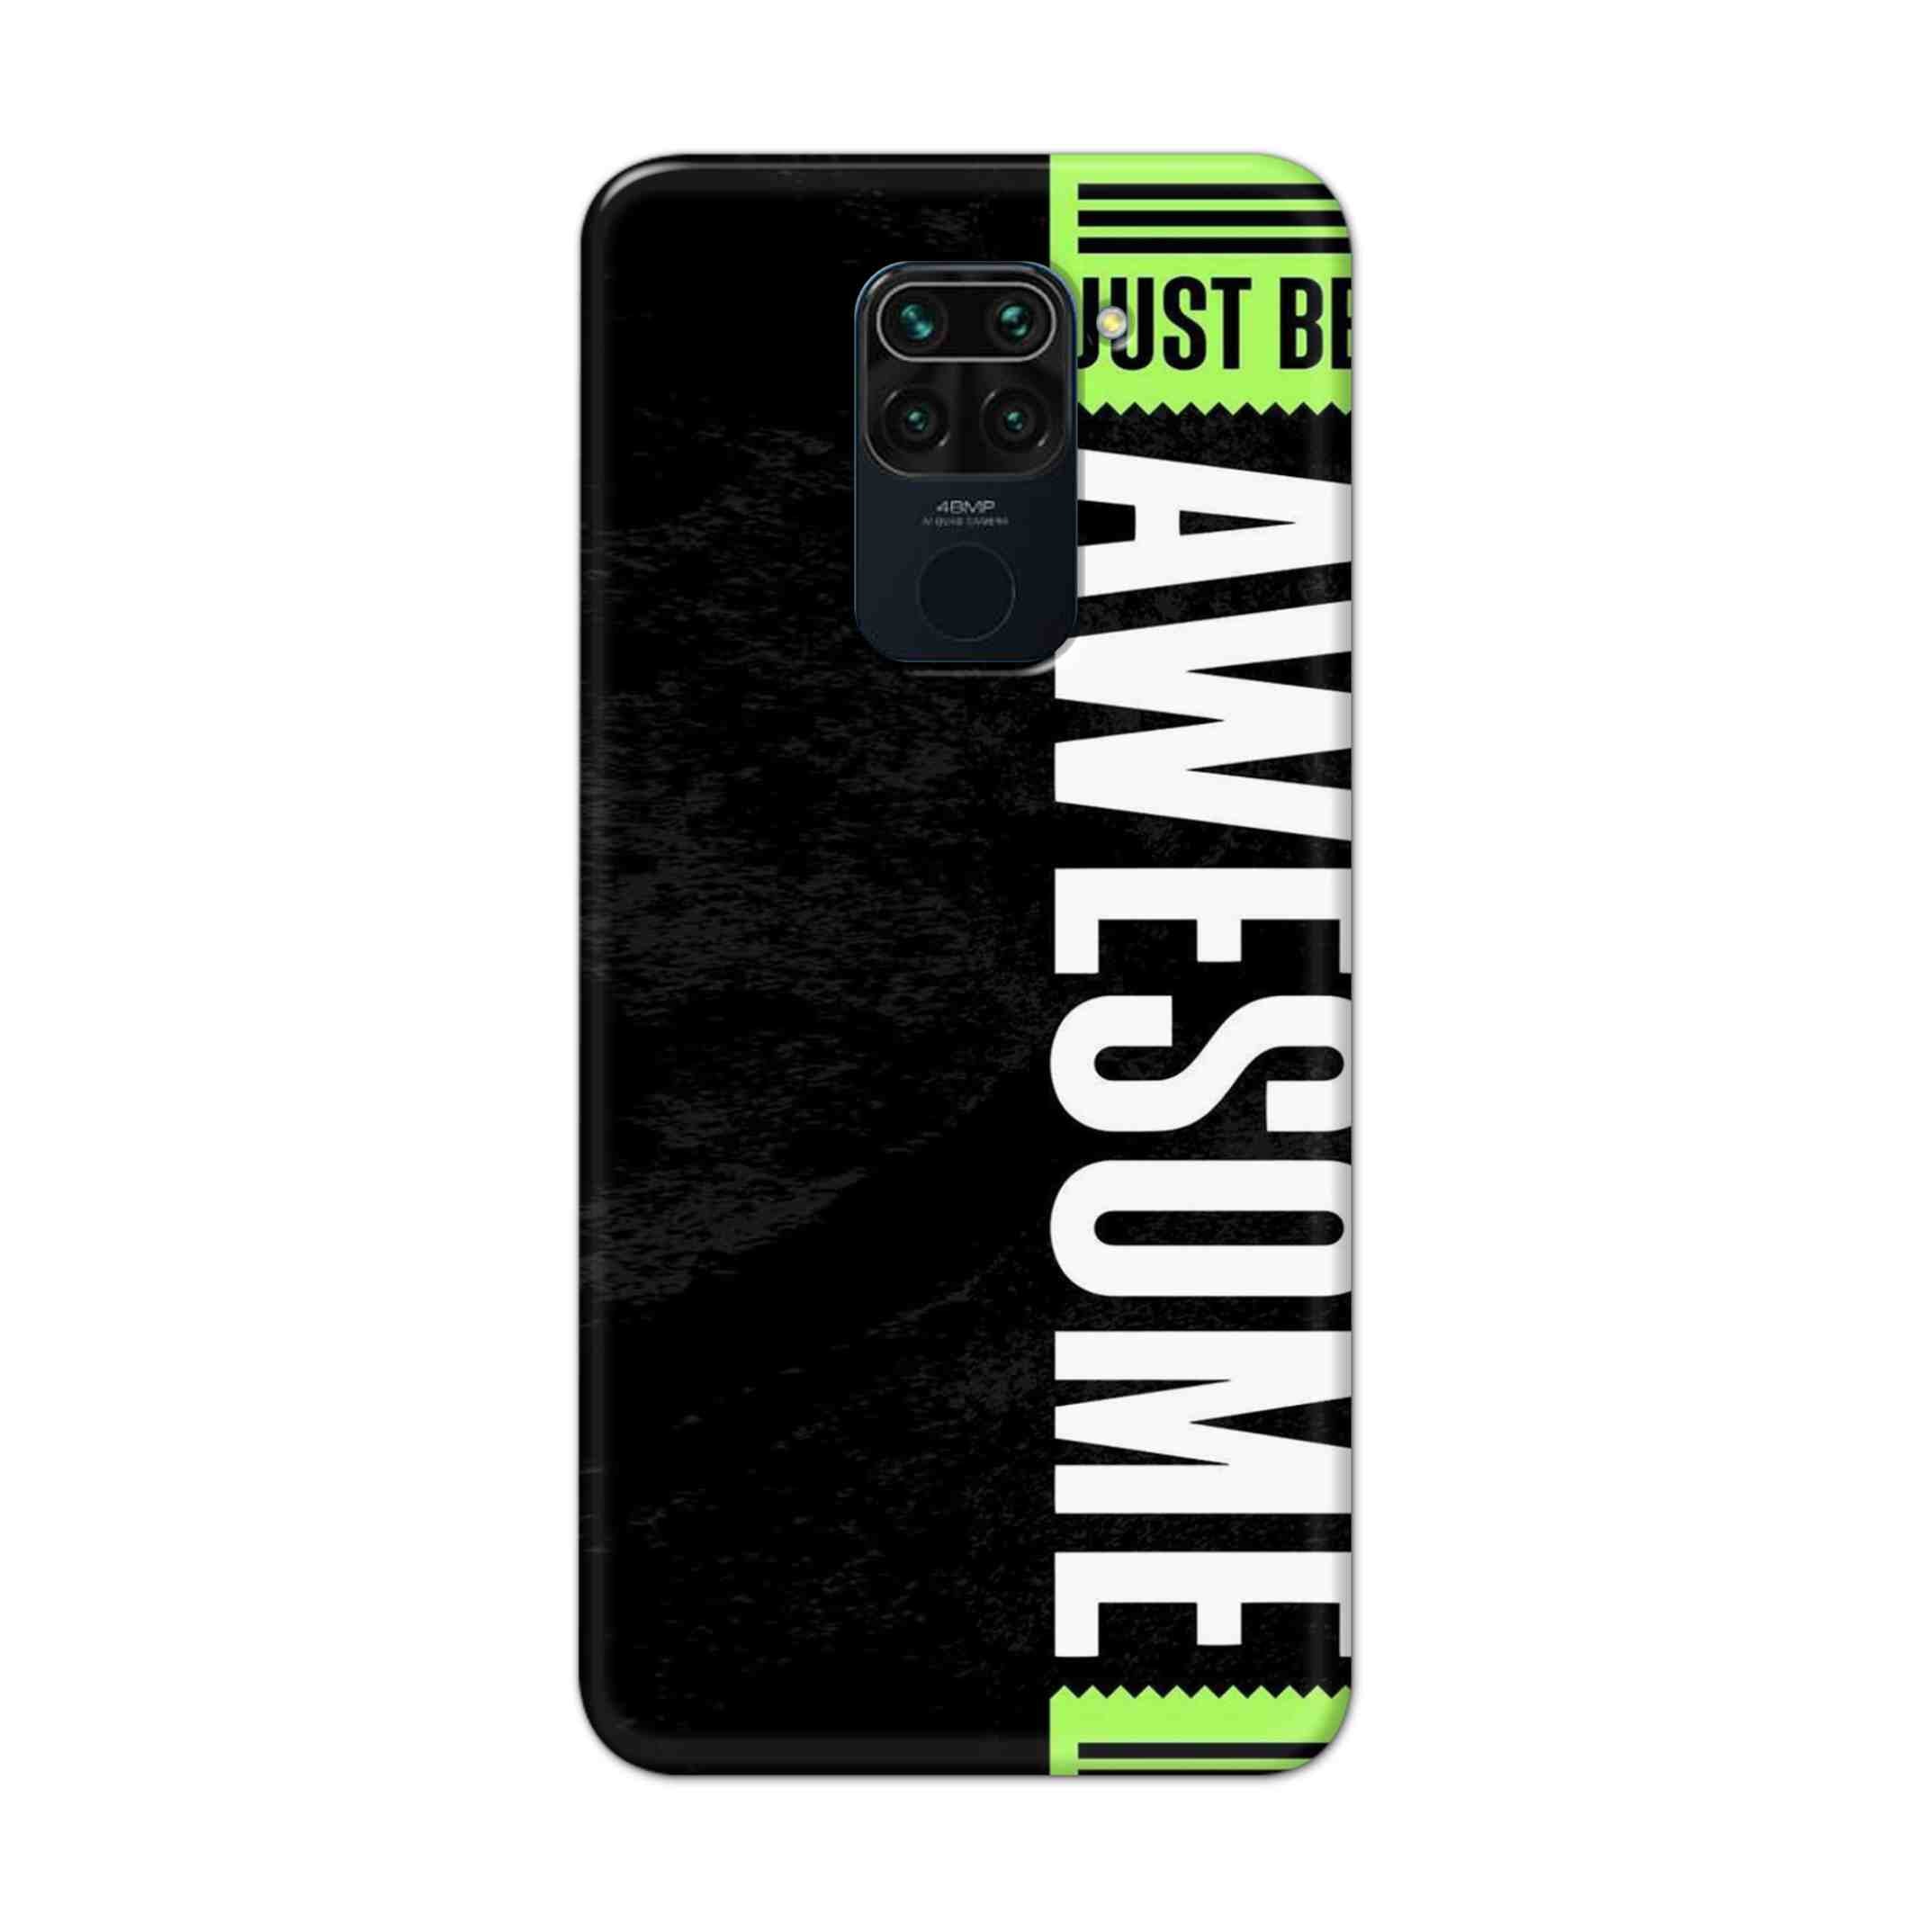 Buy Awesome Street Hard Back Mobile Phone Case Cover For Xiaomi Redmi Note 9 Online